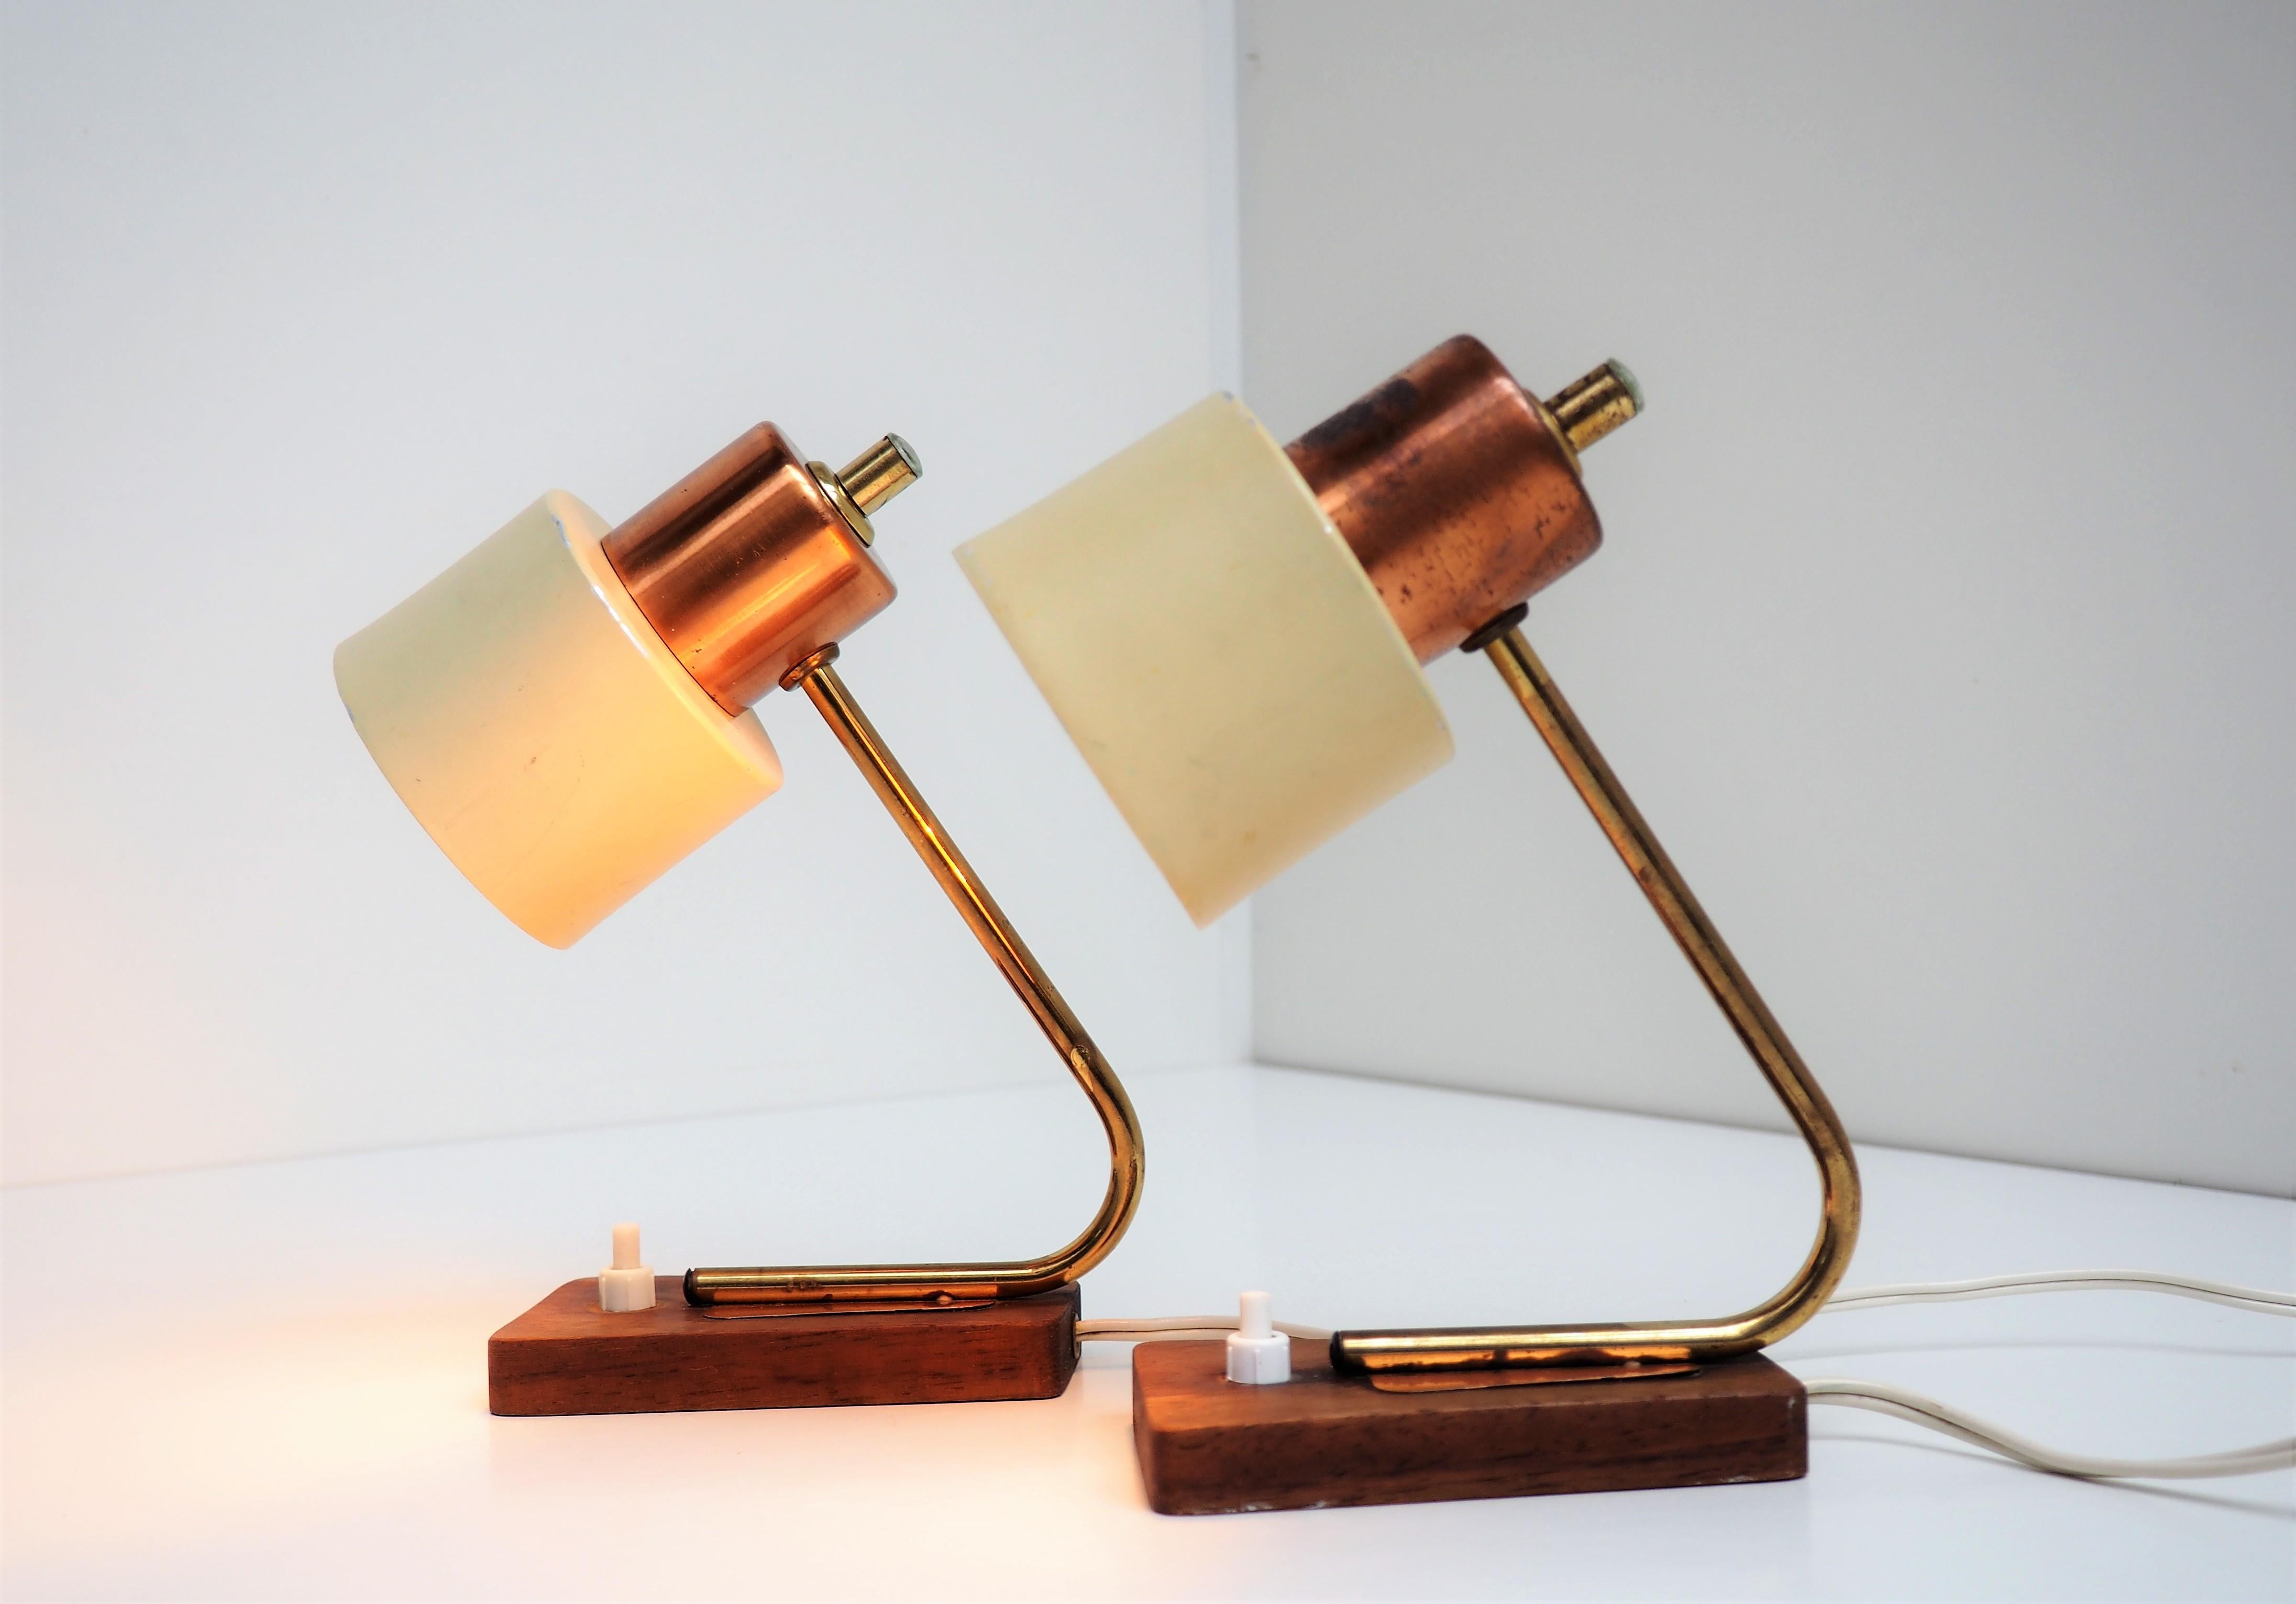 Set of Stilnovo table lamp with base made in teak together with copper, brass and beige painted aluminium shades. Rare set of vintage lighting from the 1950s most likely made by a Danish manufacturer.

The condition is good with some signs from